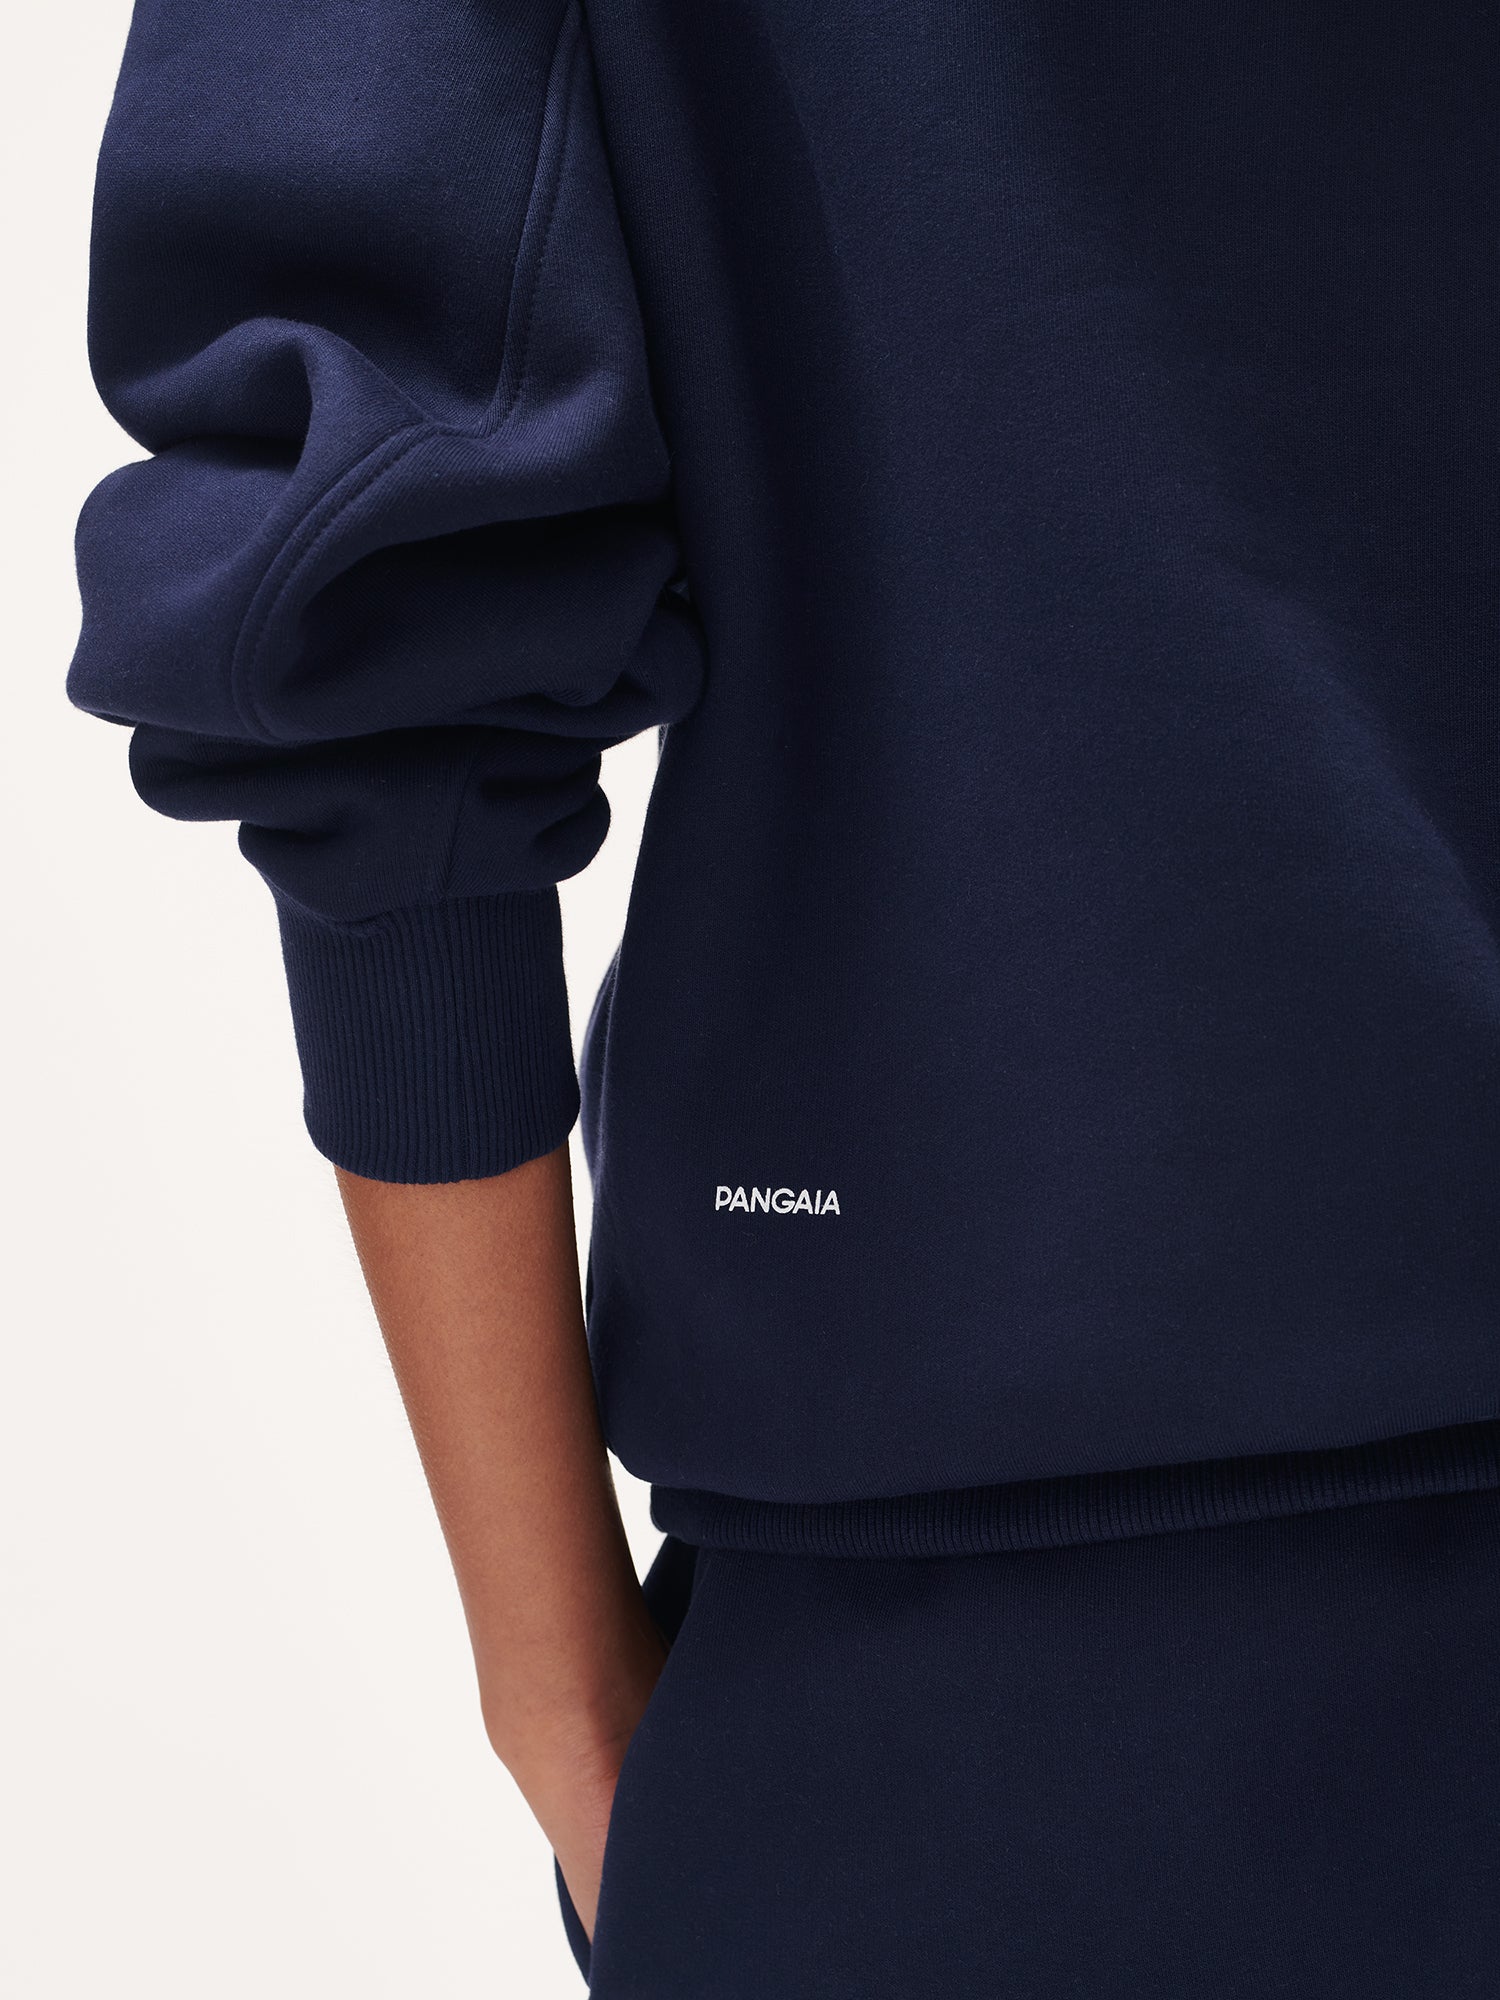 DNA_Hoodie_Navy_Male-4